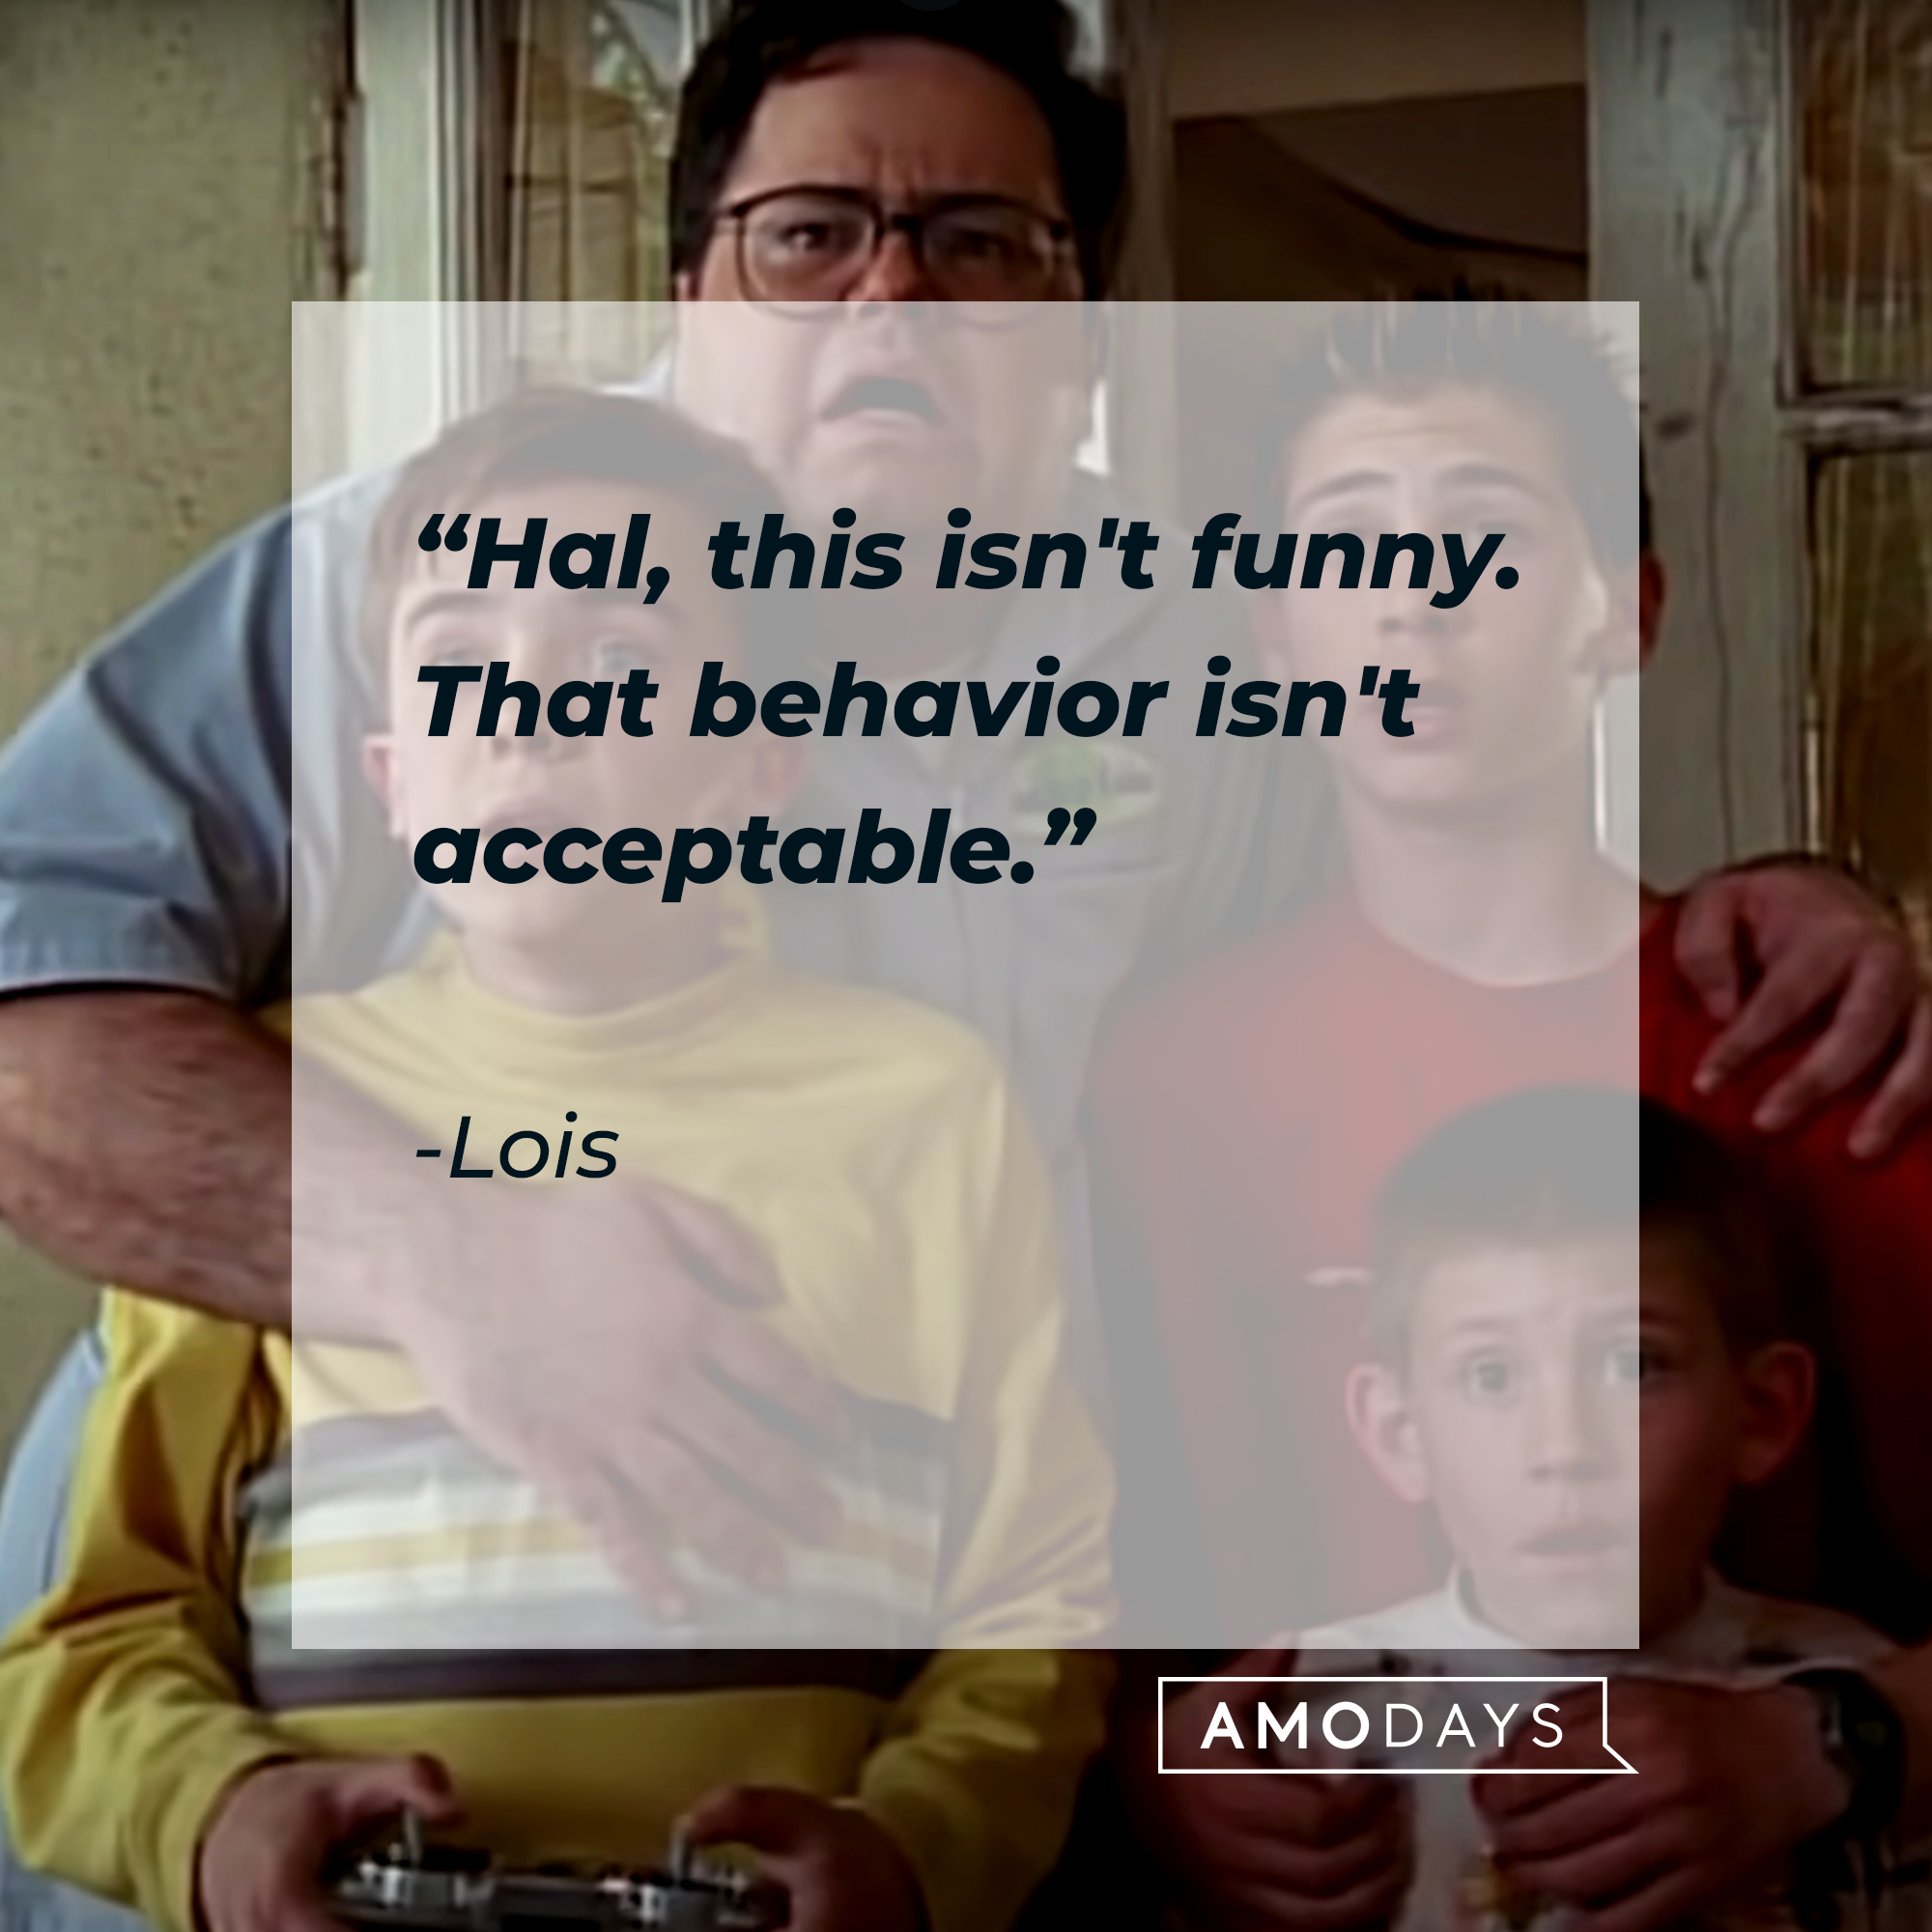 "Malcolm in the Middle" characters with Lois's quote: "Hal, this isn't funny. That behavior isn't acceptable.” | Source: YouTube.com/Channel4